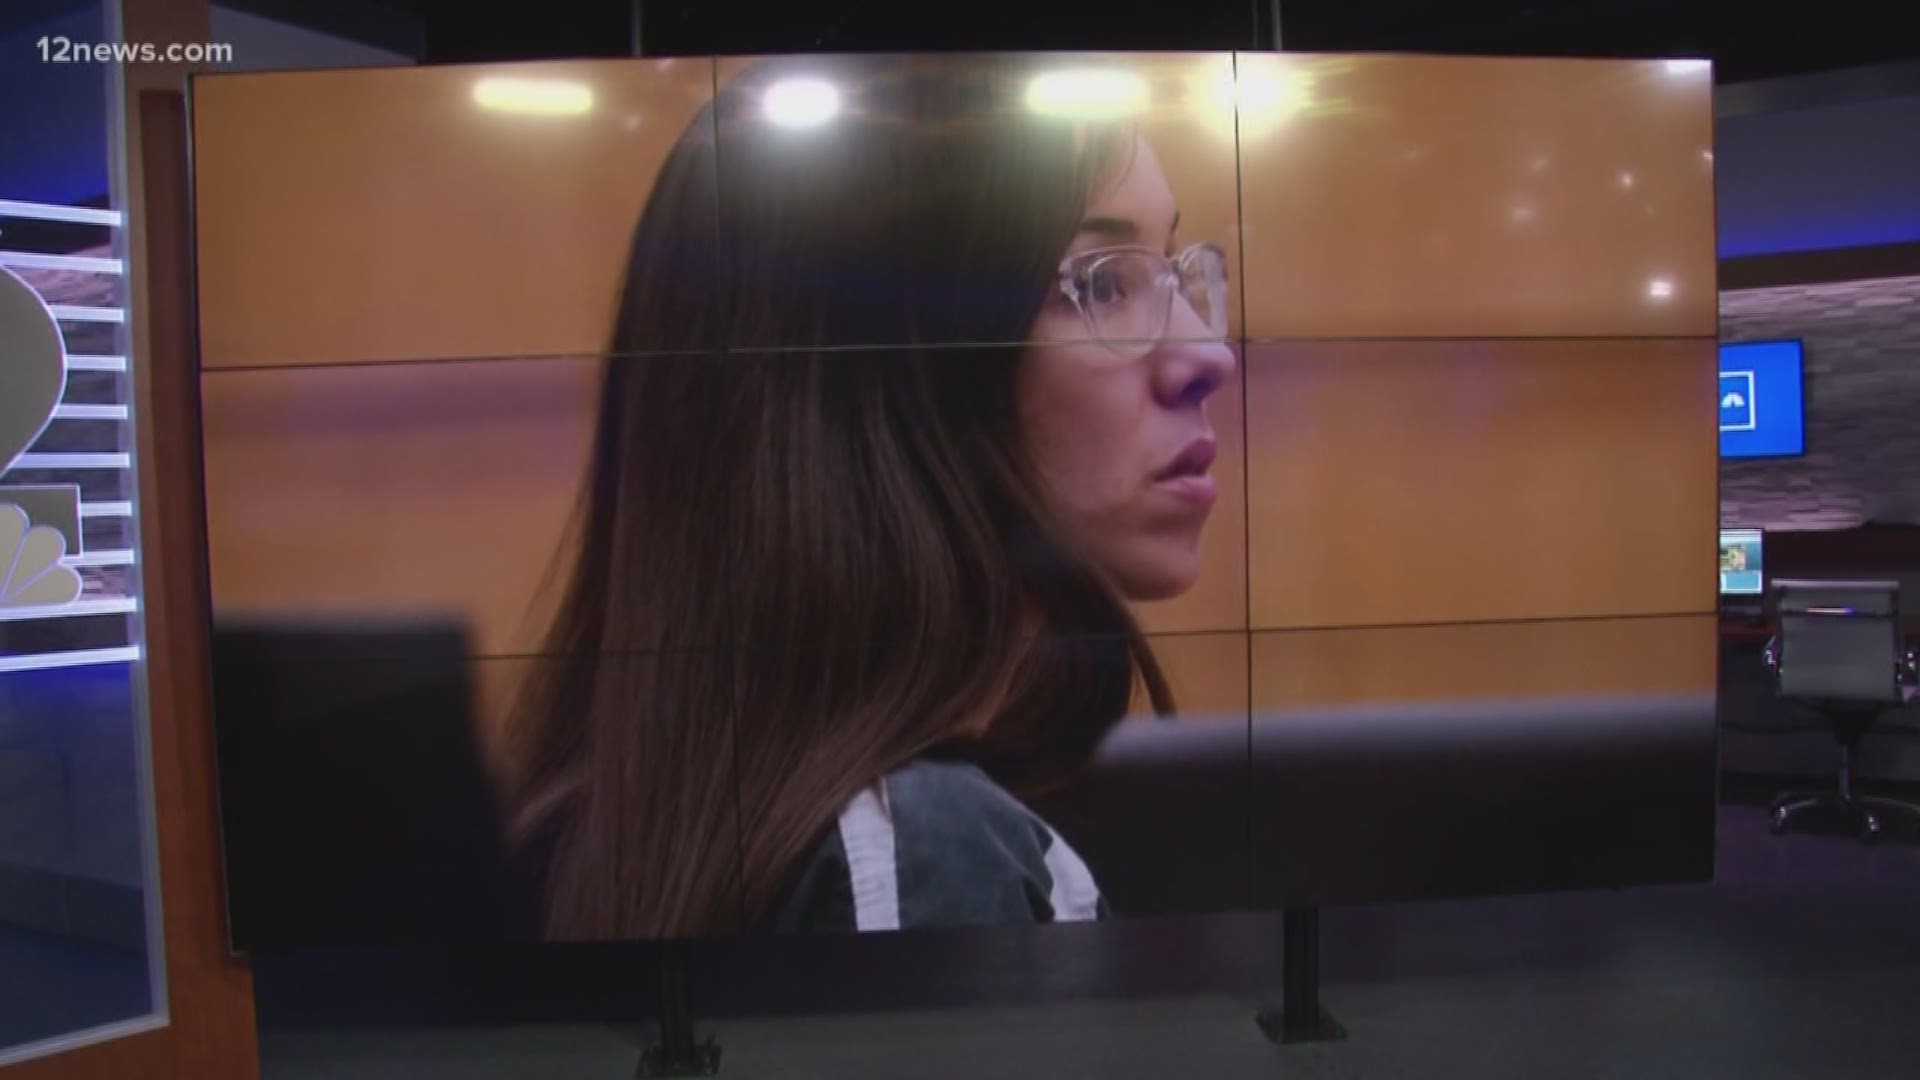 It's been several years since the country was captivated by the trail of Jodi Arias who was convicted of first degree murder.